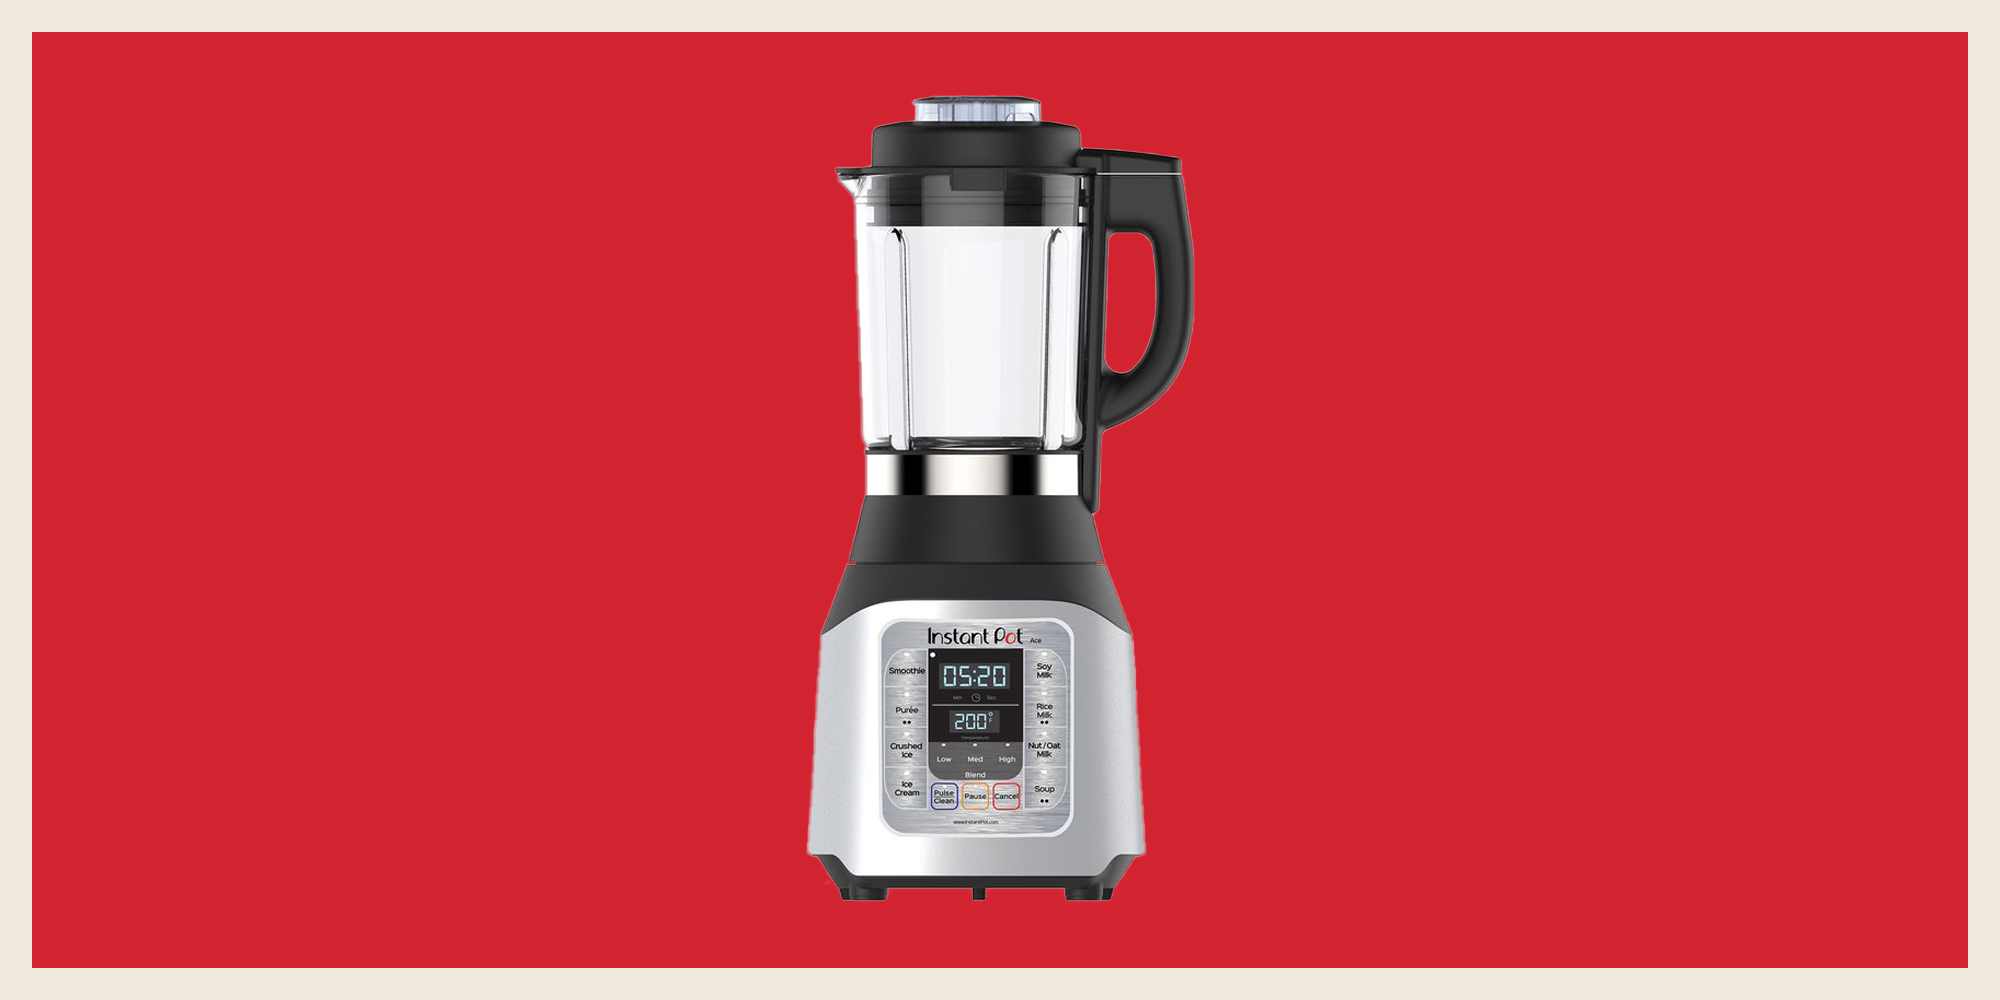 https://hips.hearstapps.com/hmg-prod/images/mh-instant-pot-product-red-1578677420.png